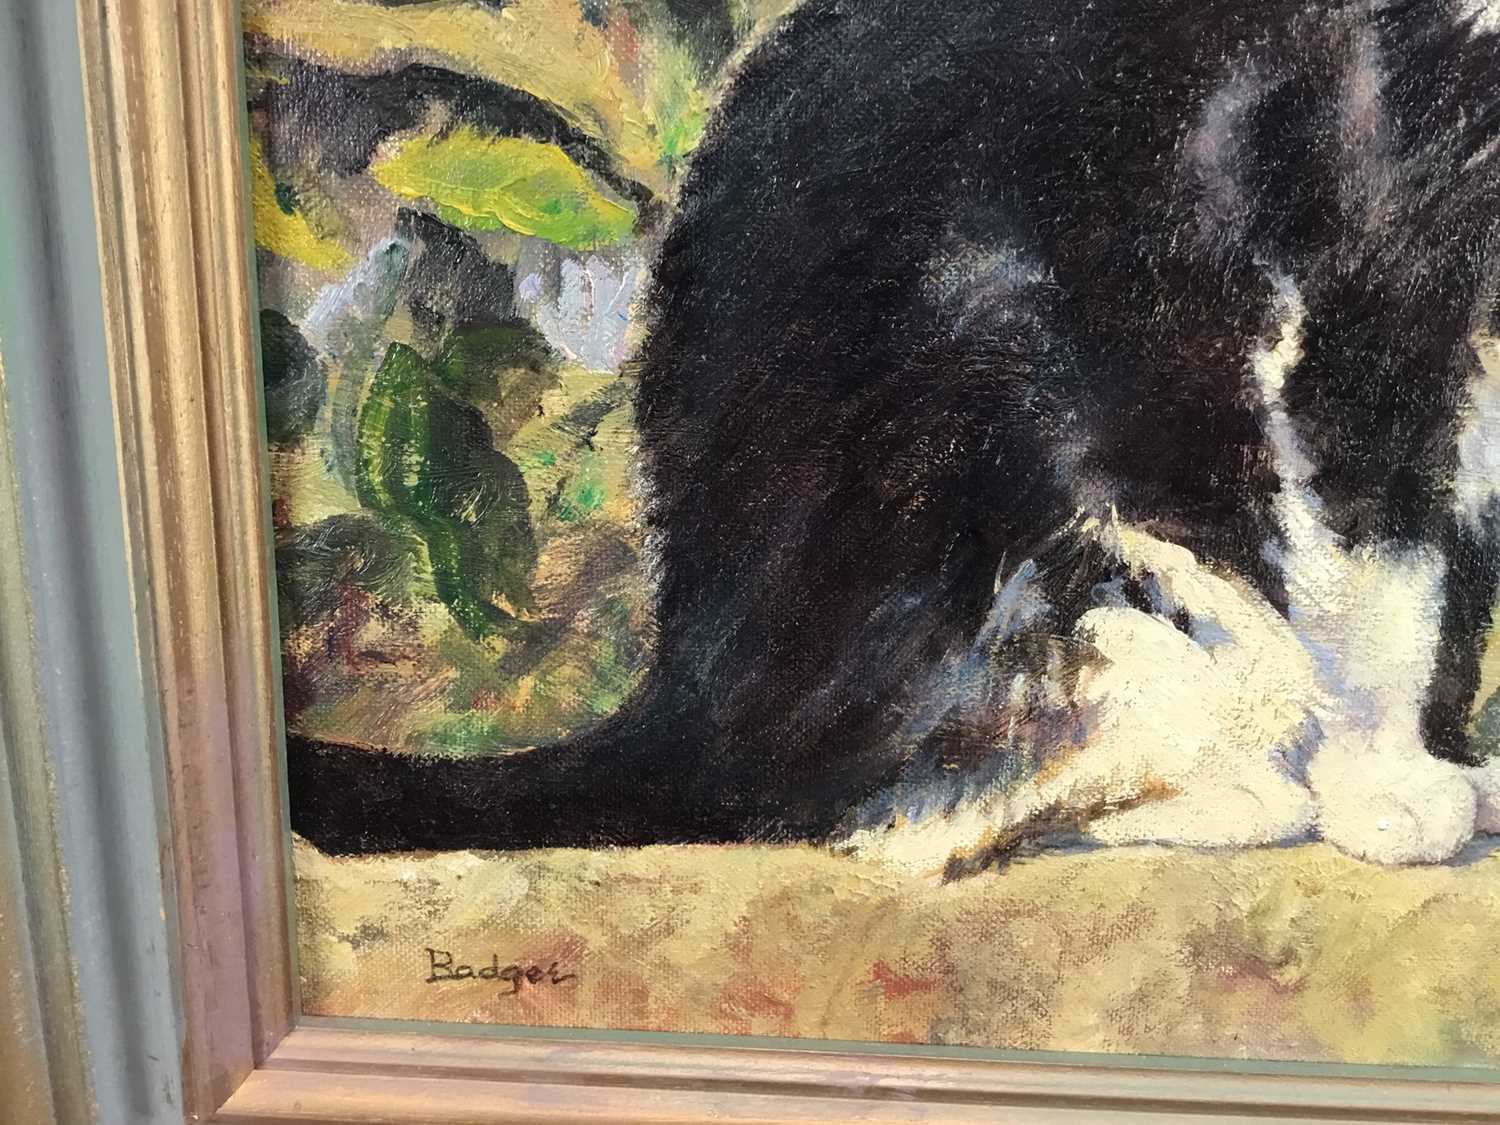 Norman Coker, contemporary, oil on board, 'Badger', signed and titled, 34 x 39cm, framed - Image 6 of 7